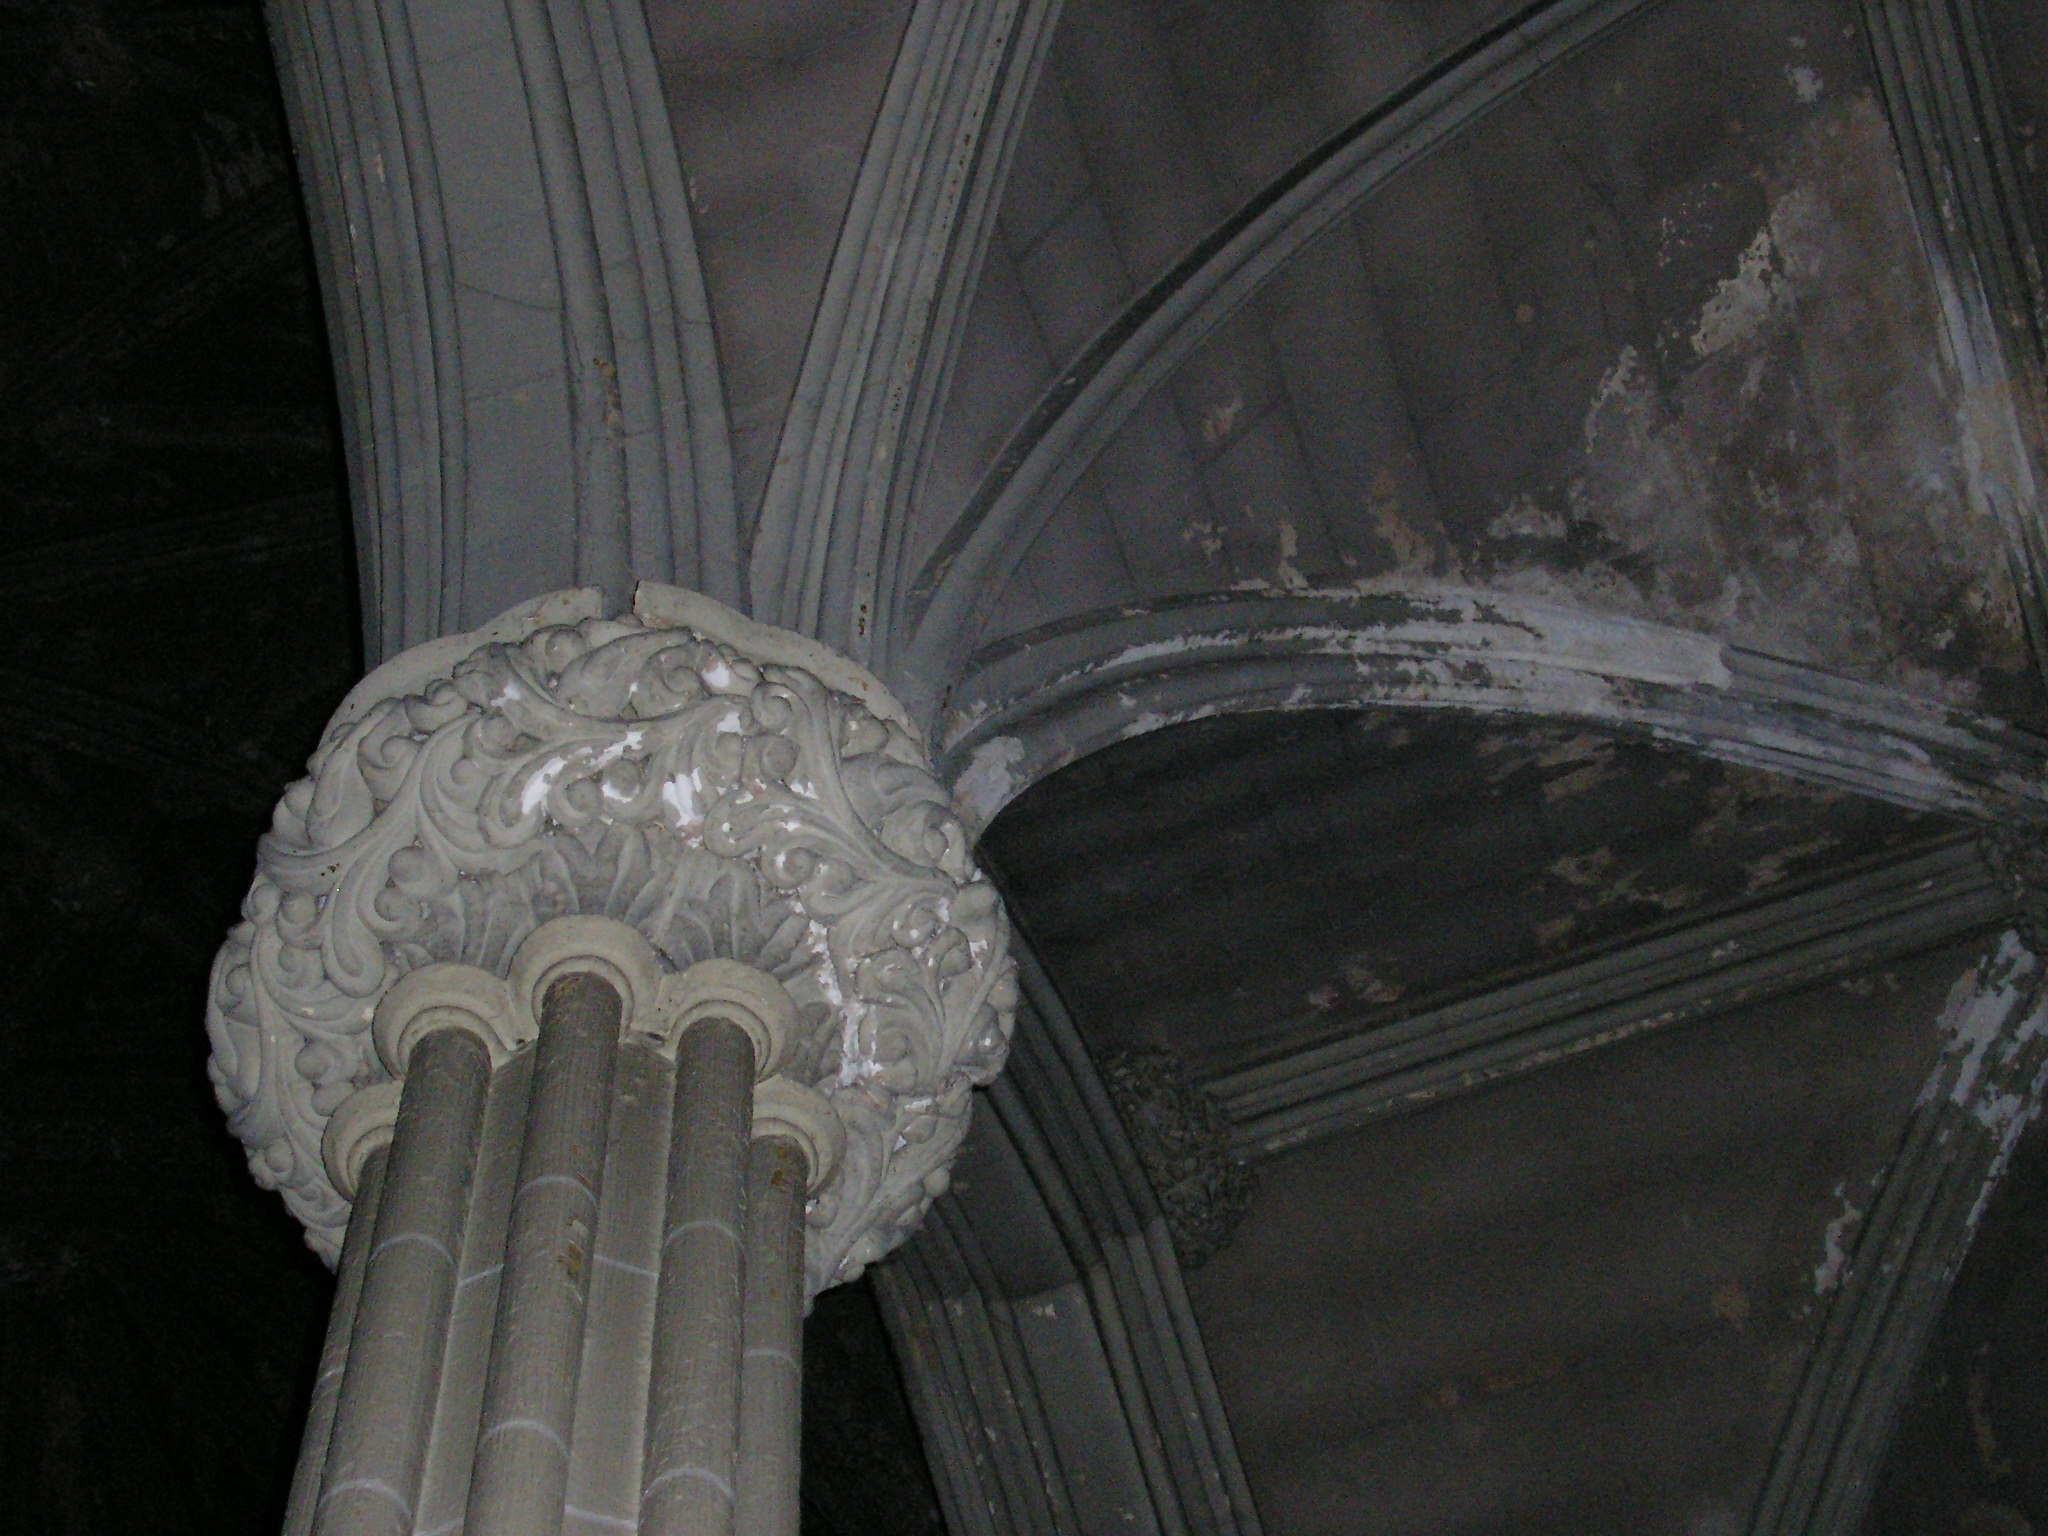 The columns of the church were topped with elaborate ornamentation in this 2007 photo.